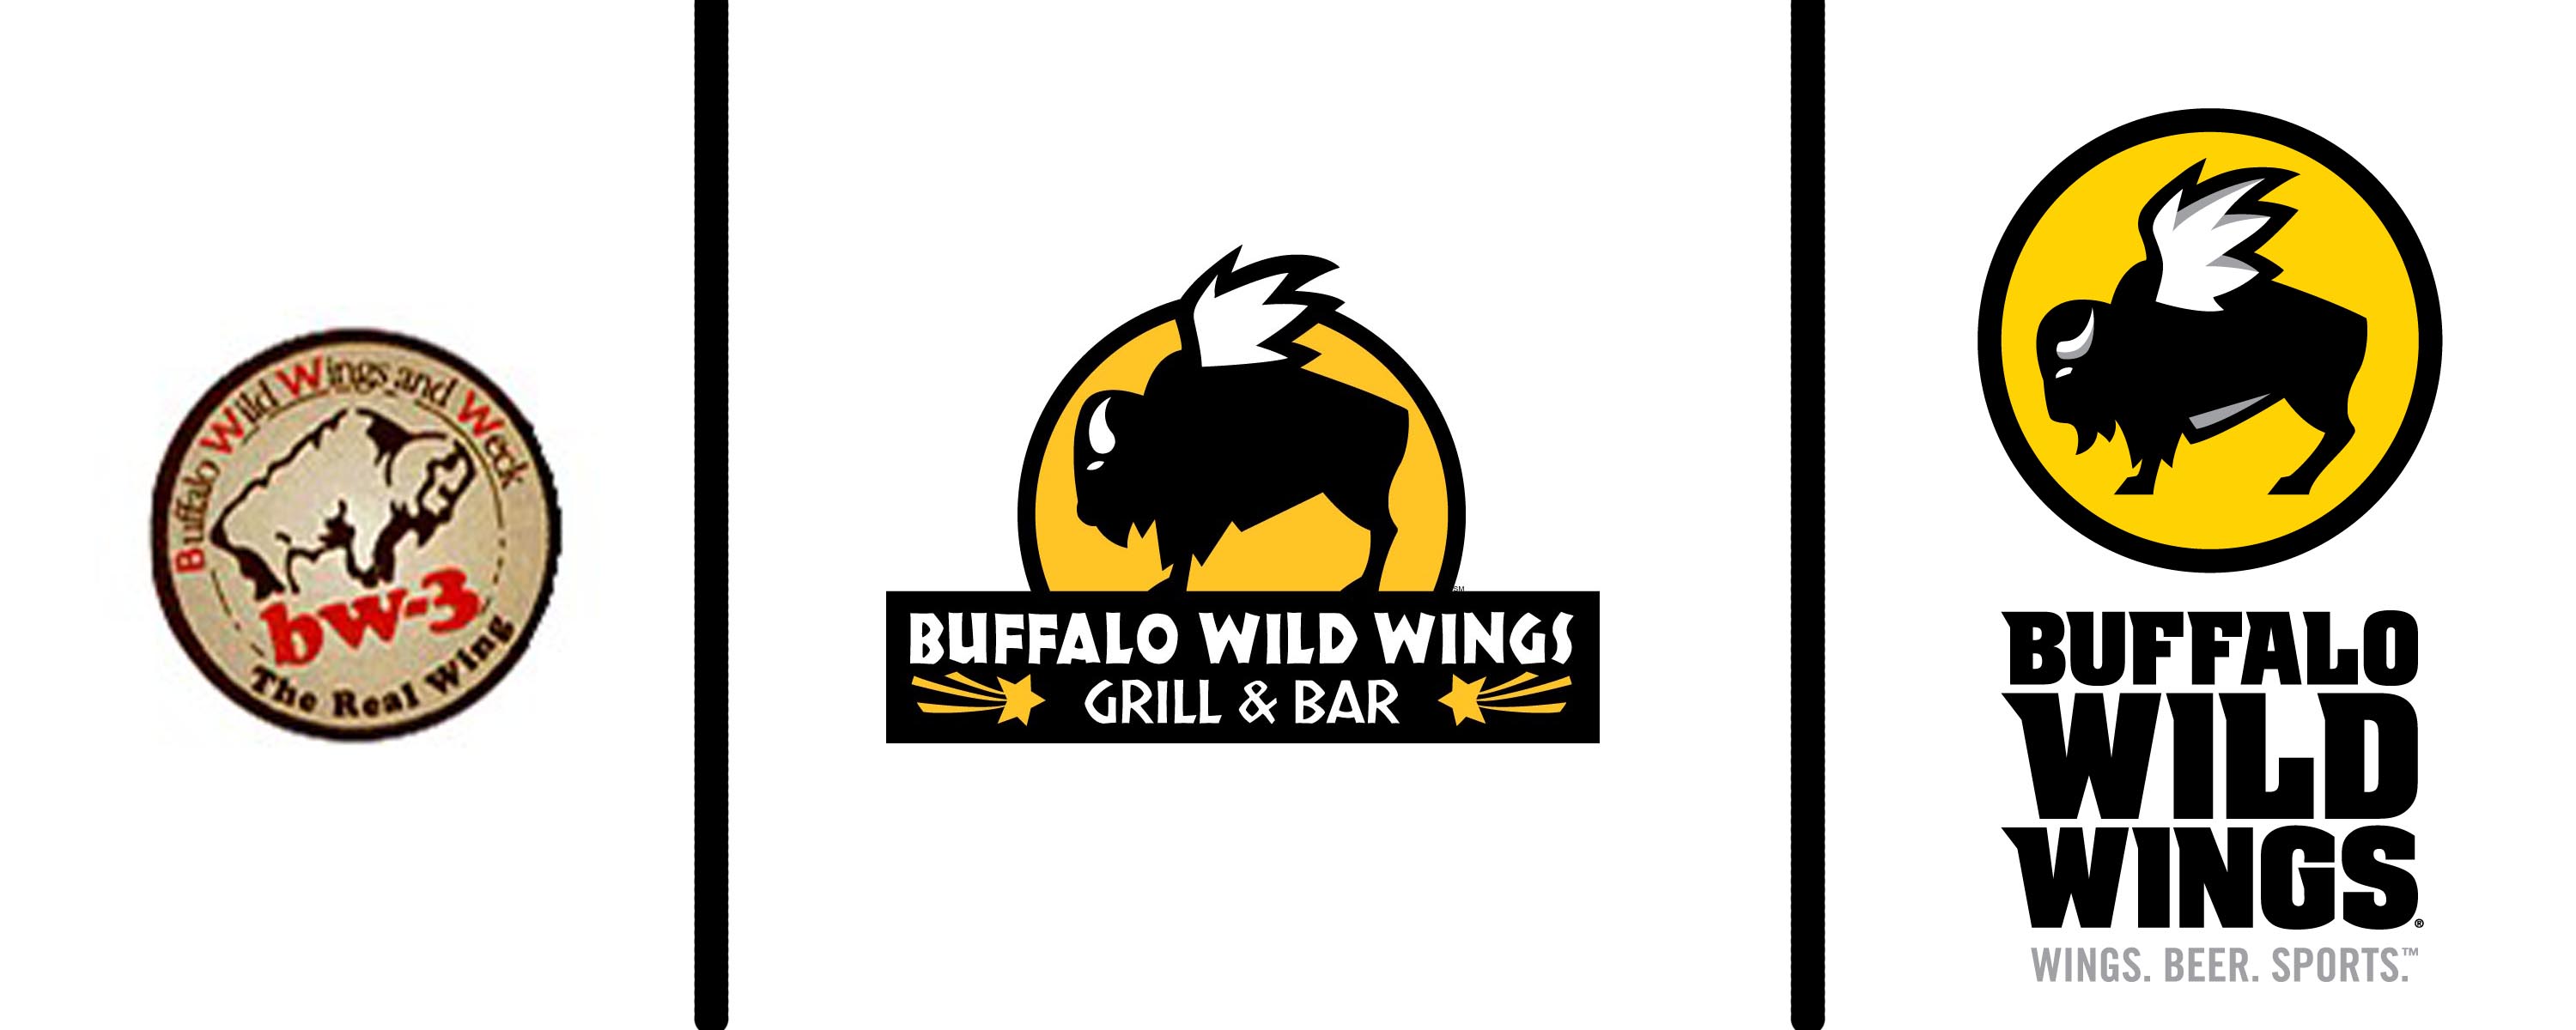 buffalo wild wings and weck - seplm.ru.